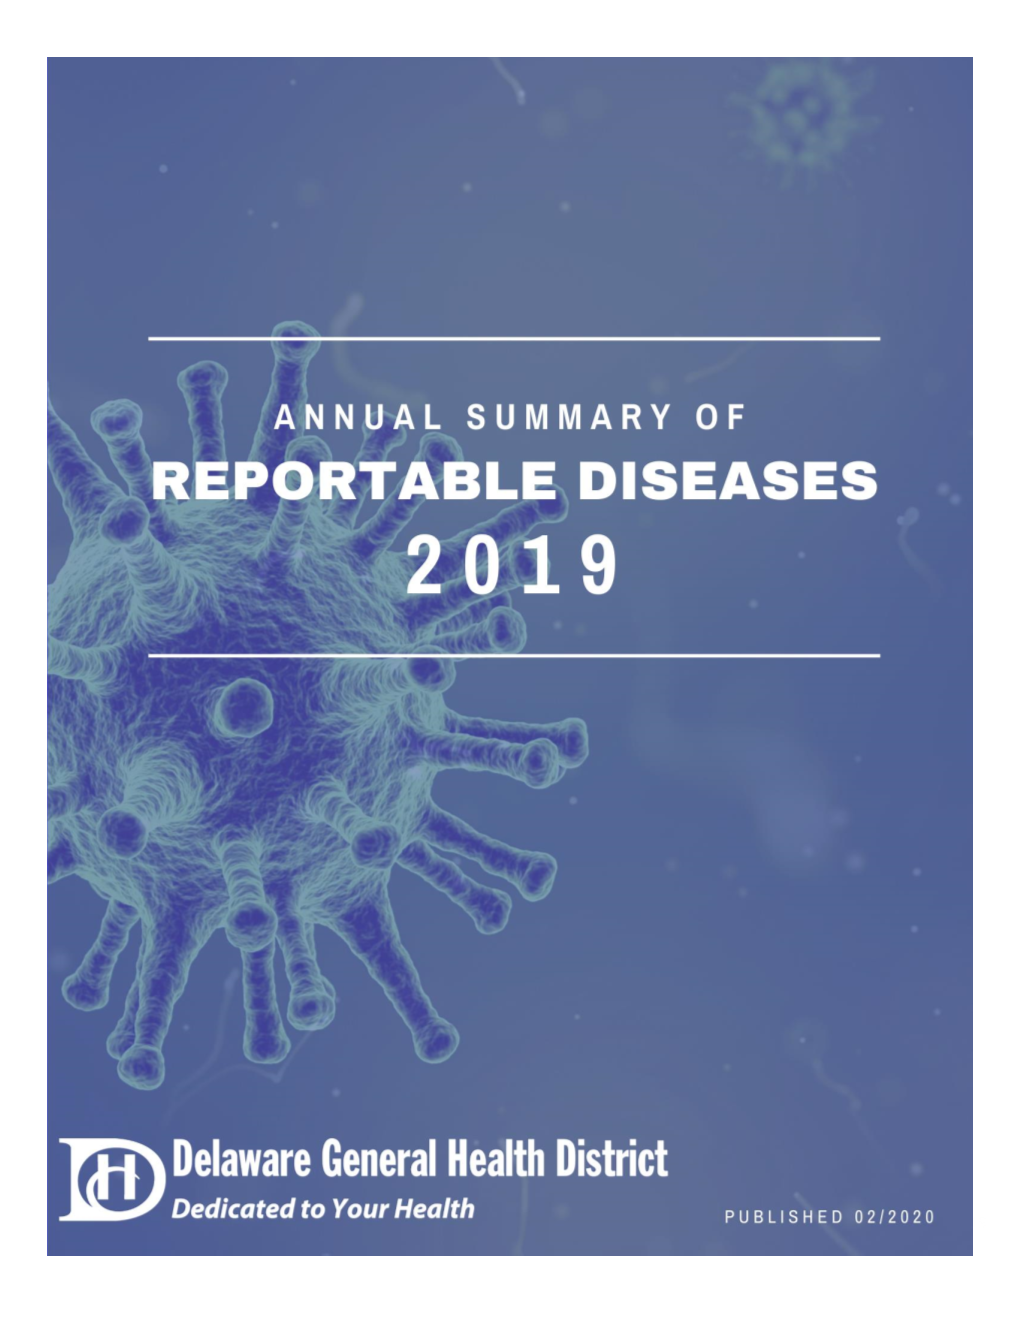 Delaware General Health District Communicable Disease Annual